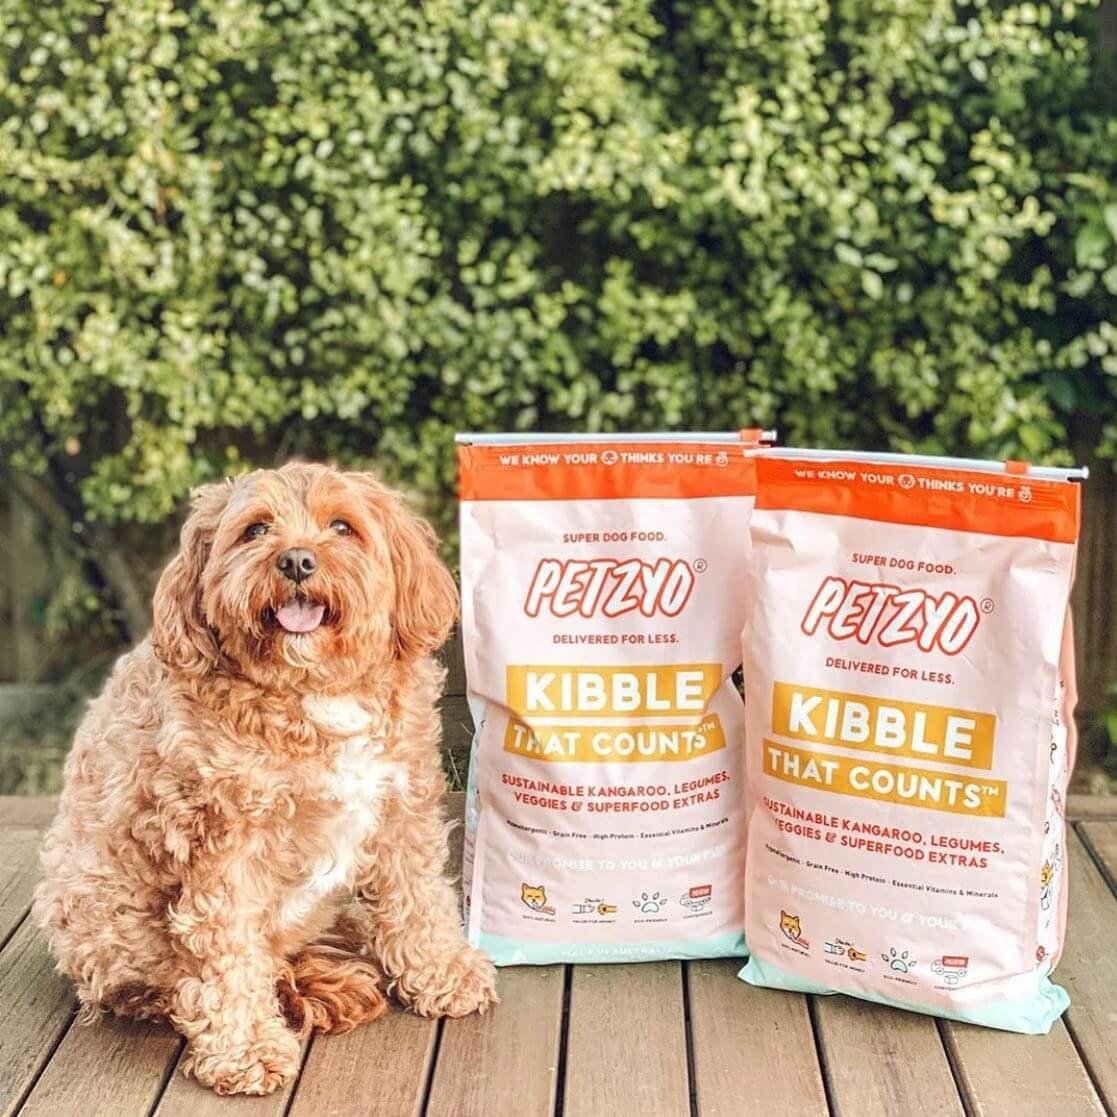 Cavoodle about to eat Petzyo dog food